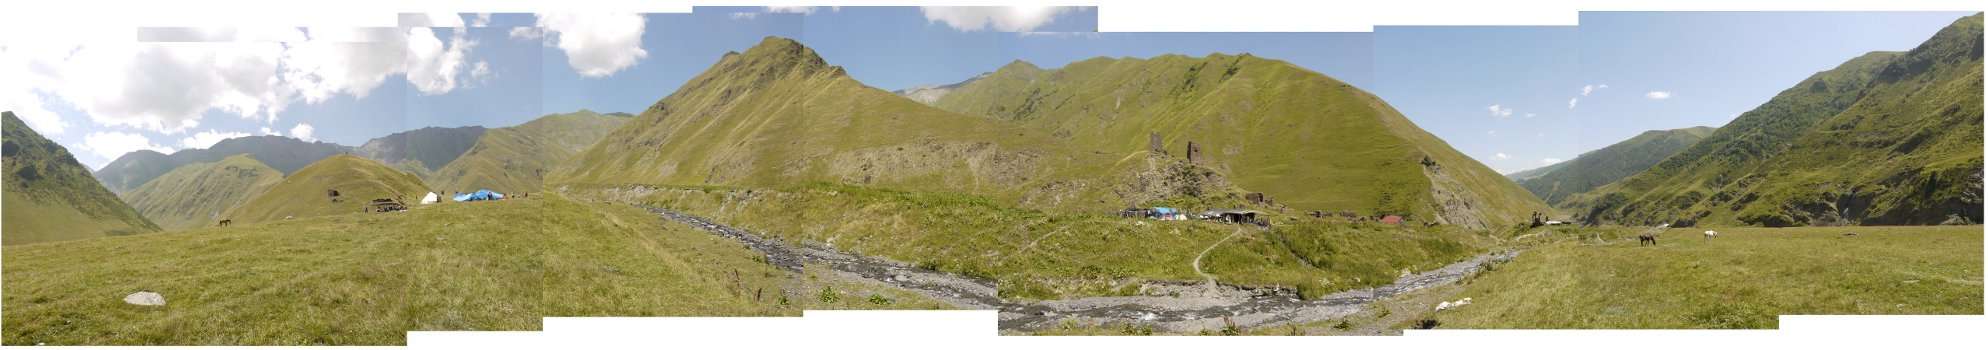 A panorama of Tsovata in the mountainous eastern Georgian region of Tusheti. The photograph was taken during the Bats people's annual summer festival (dadaloba) in 2010.